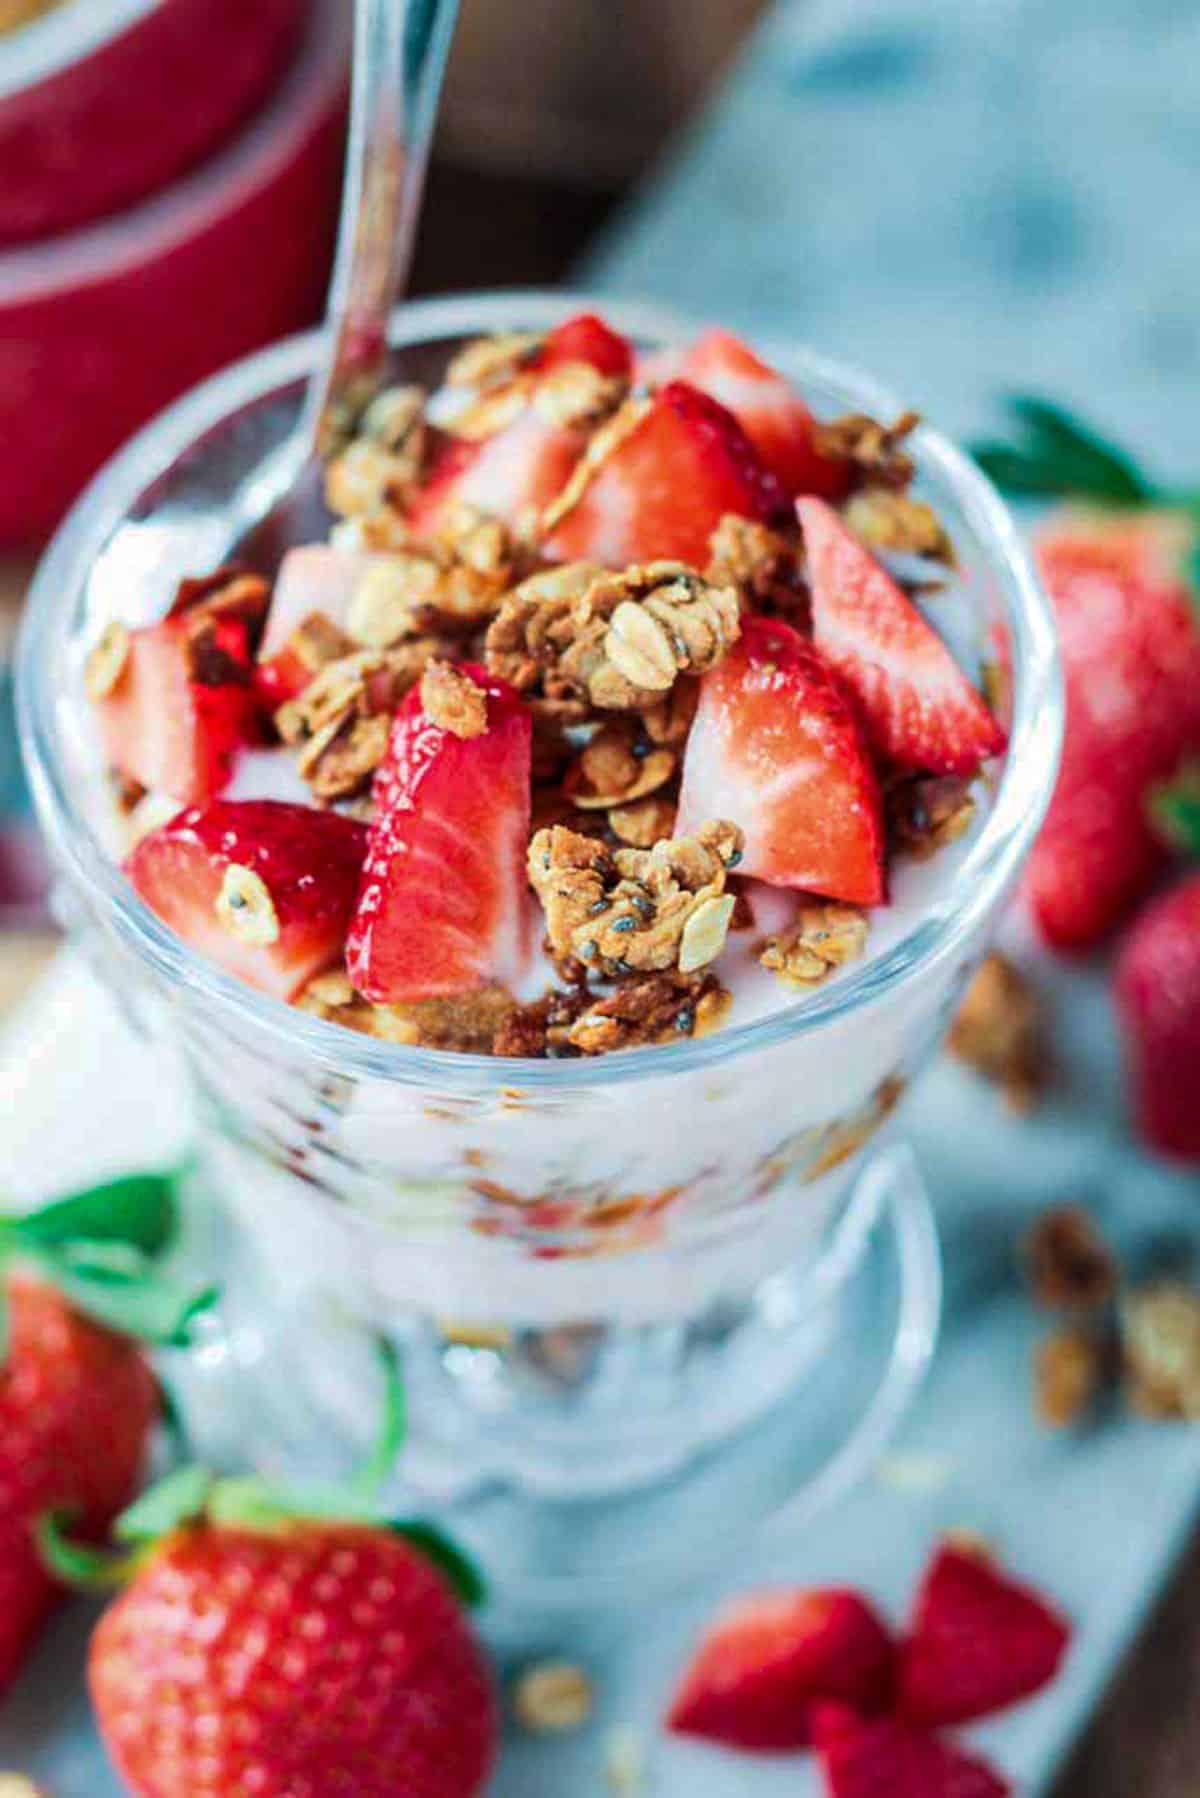 Overhead view of granola and fresh fruit in a glass.